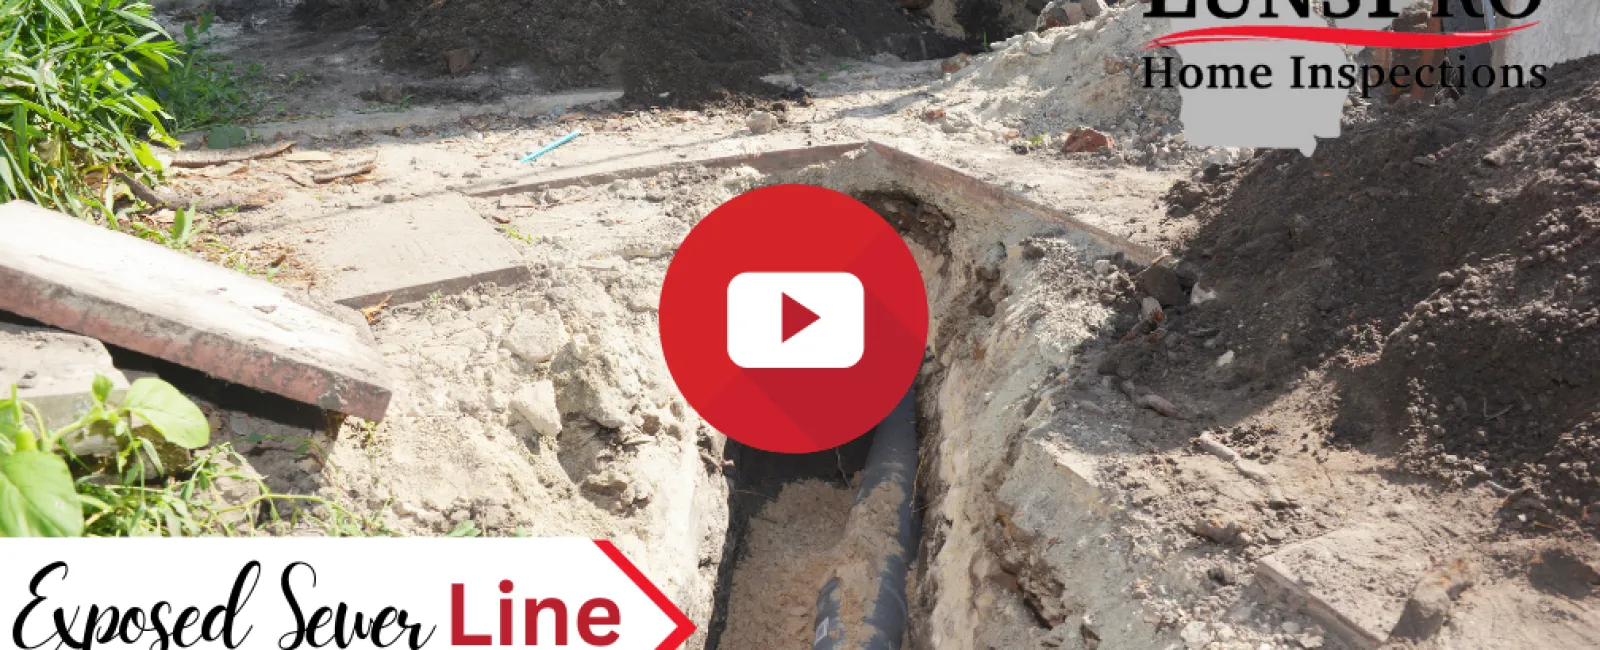 Exposed Sewer Line